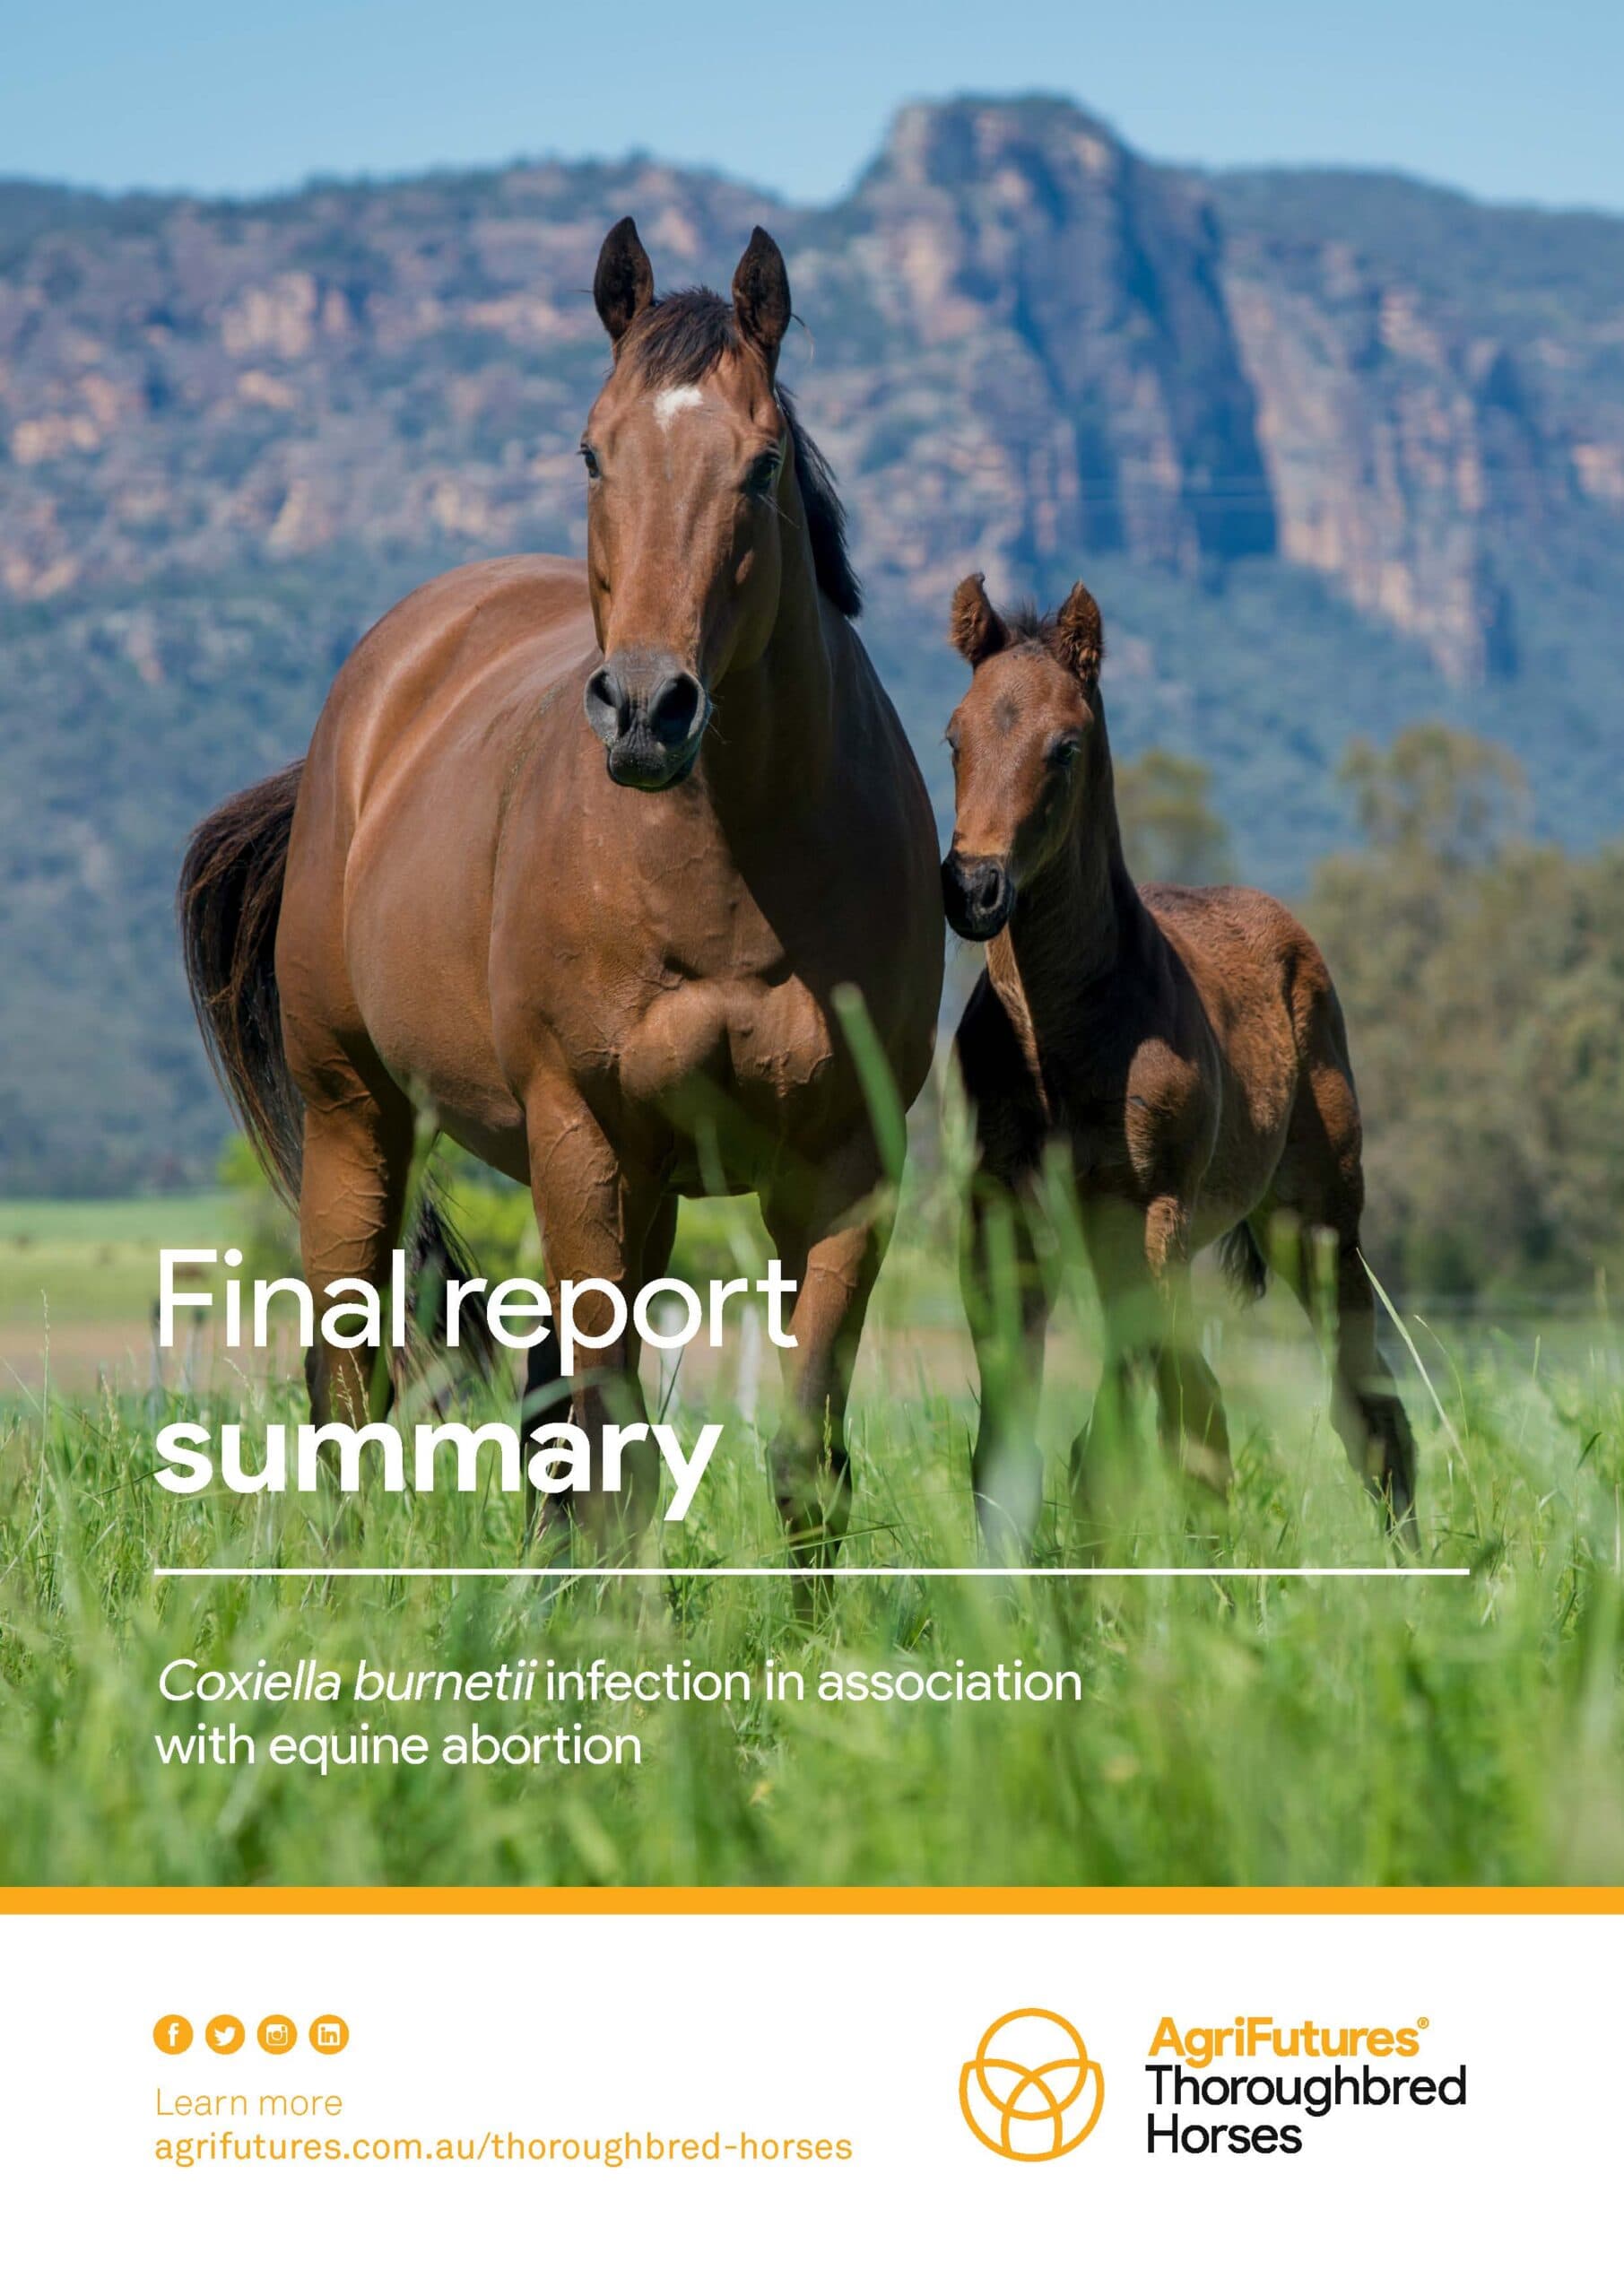 Final report summary: Coxiella burnetii infection in association with equine abortion - image